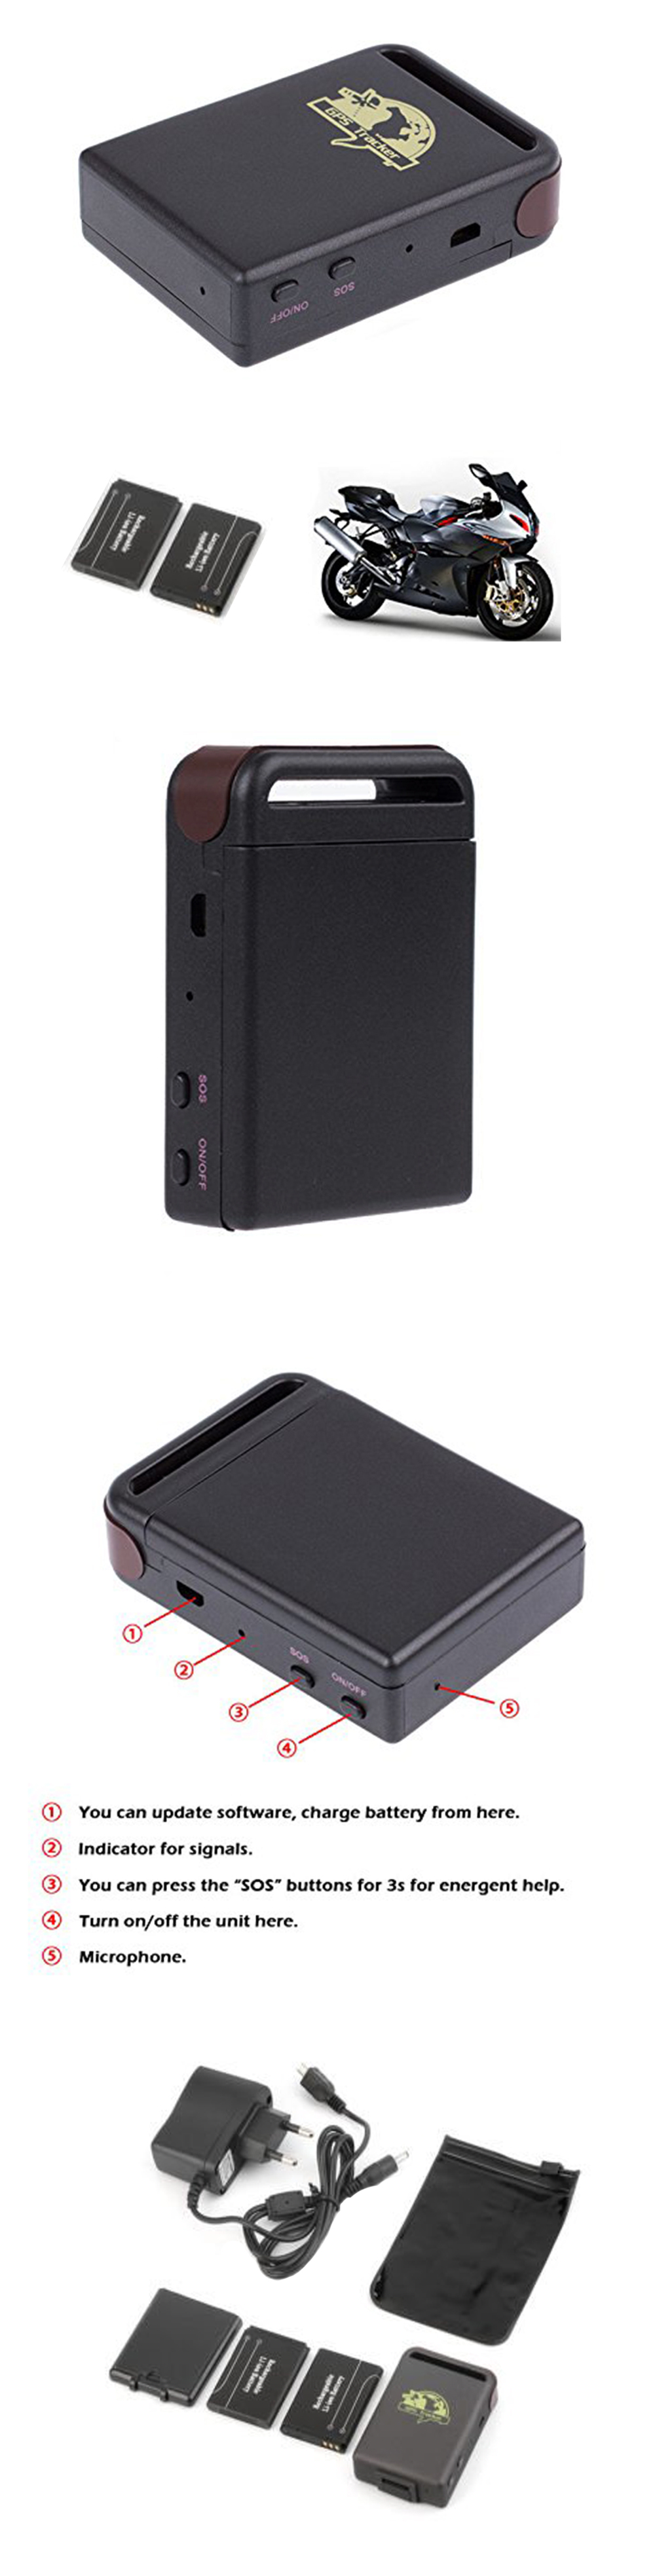 Mini Car Vehicle Tracker Real time GPS/SMS/GPRS Tracking Device TK102-2